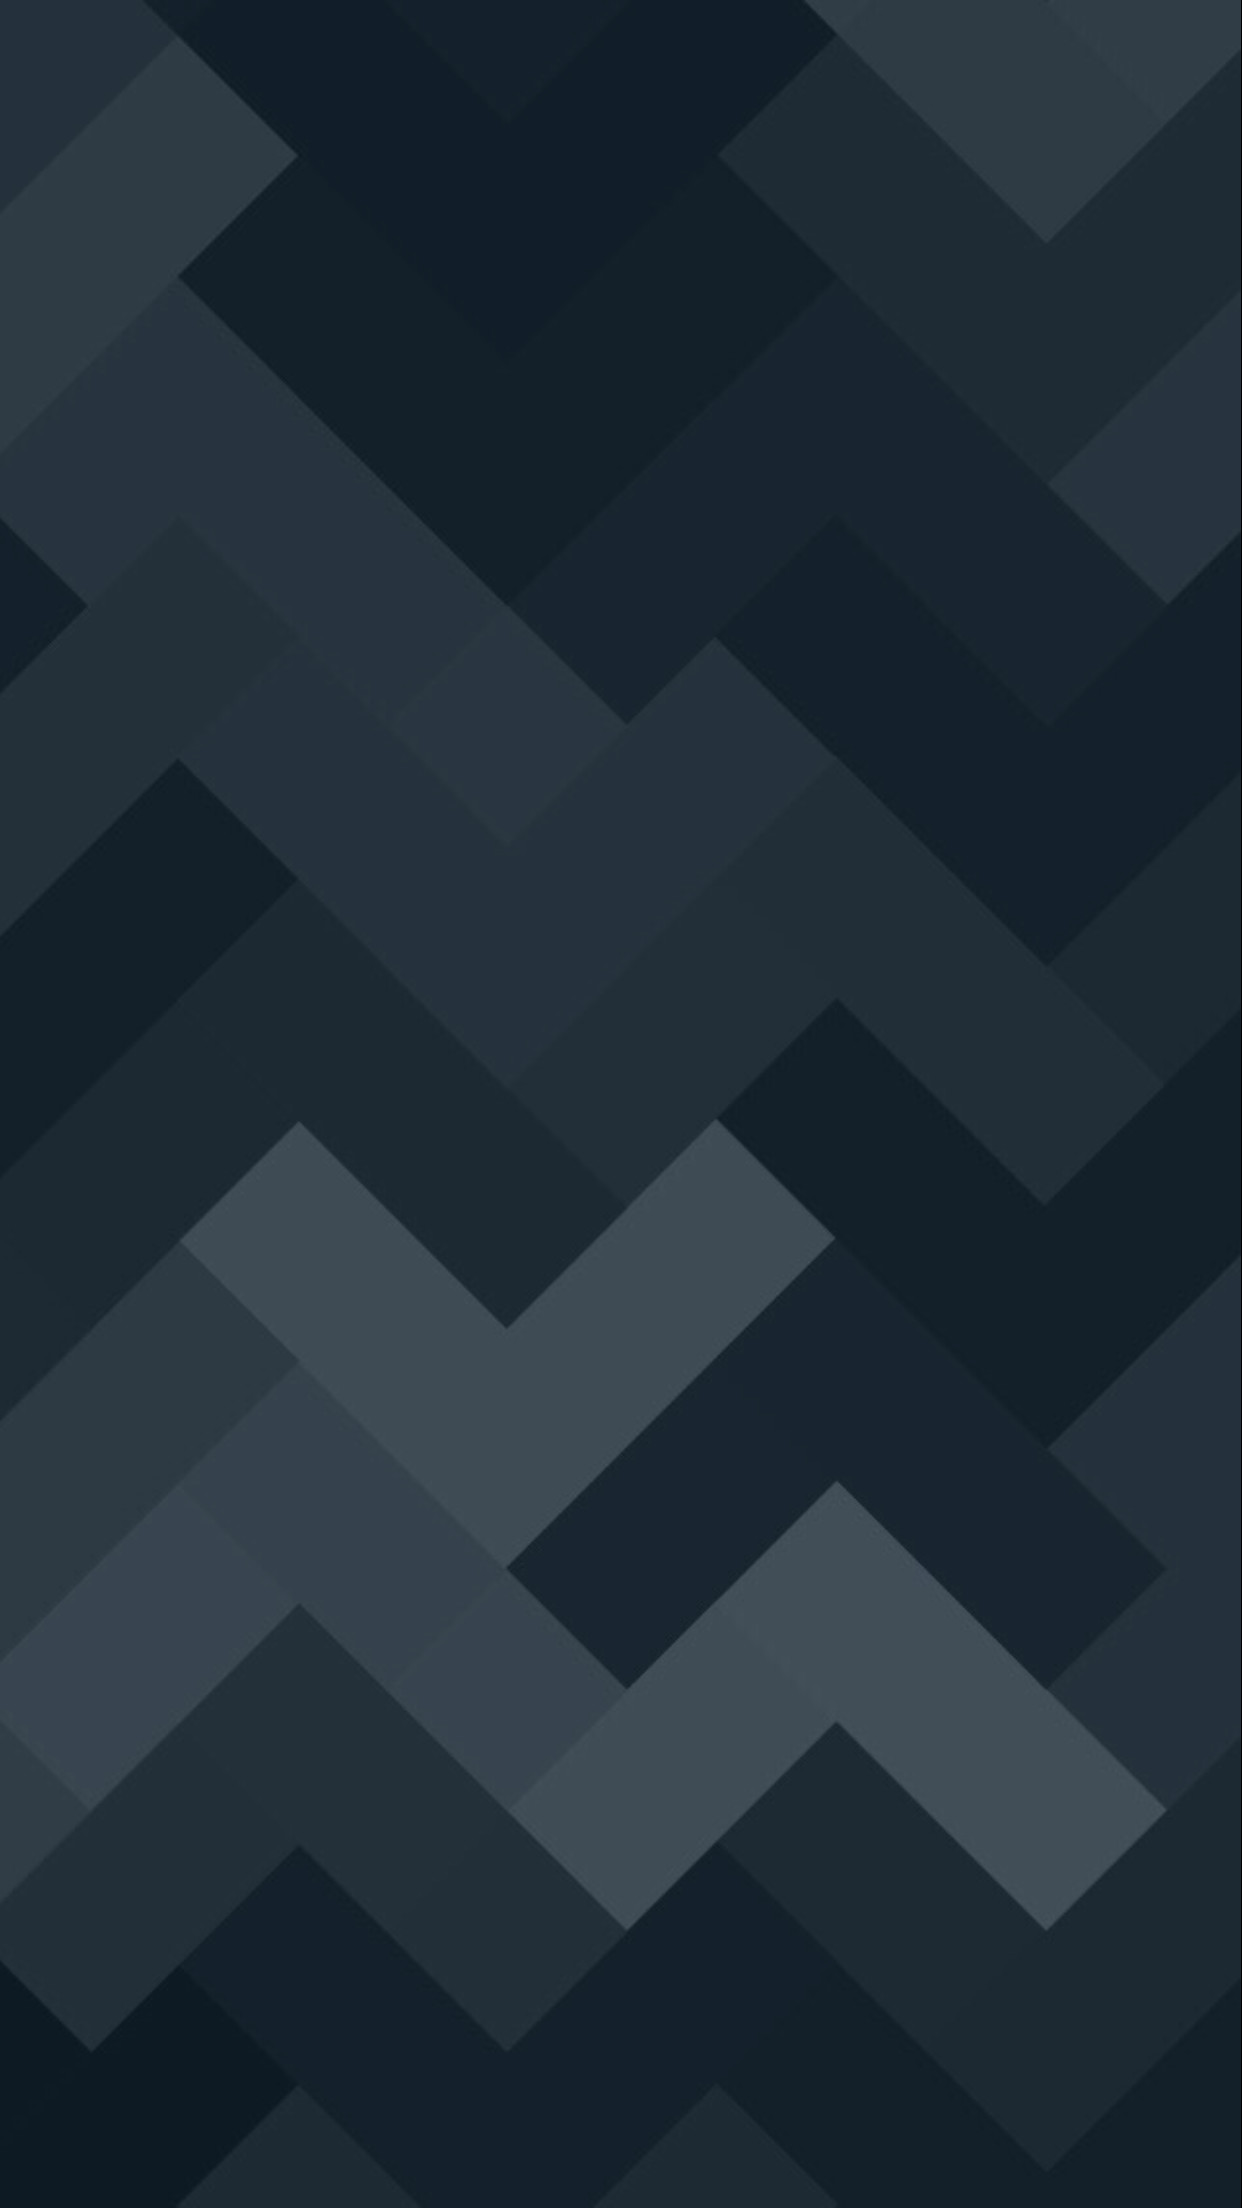 1242x2208 Minimalist wallpaper for iPhone 6 - iPhone, iPad, iPod Forums at